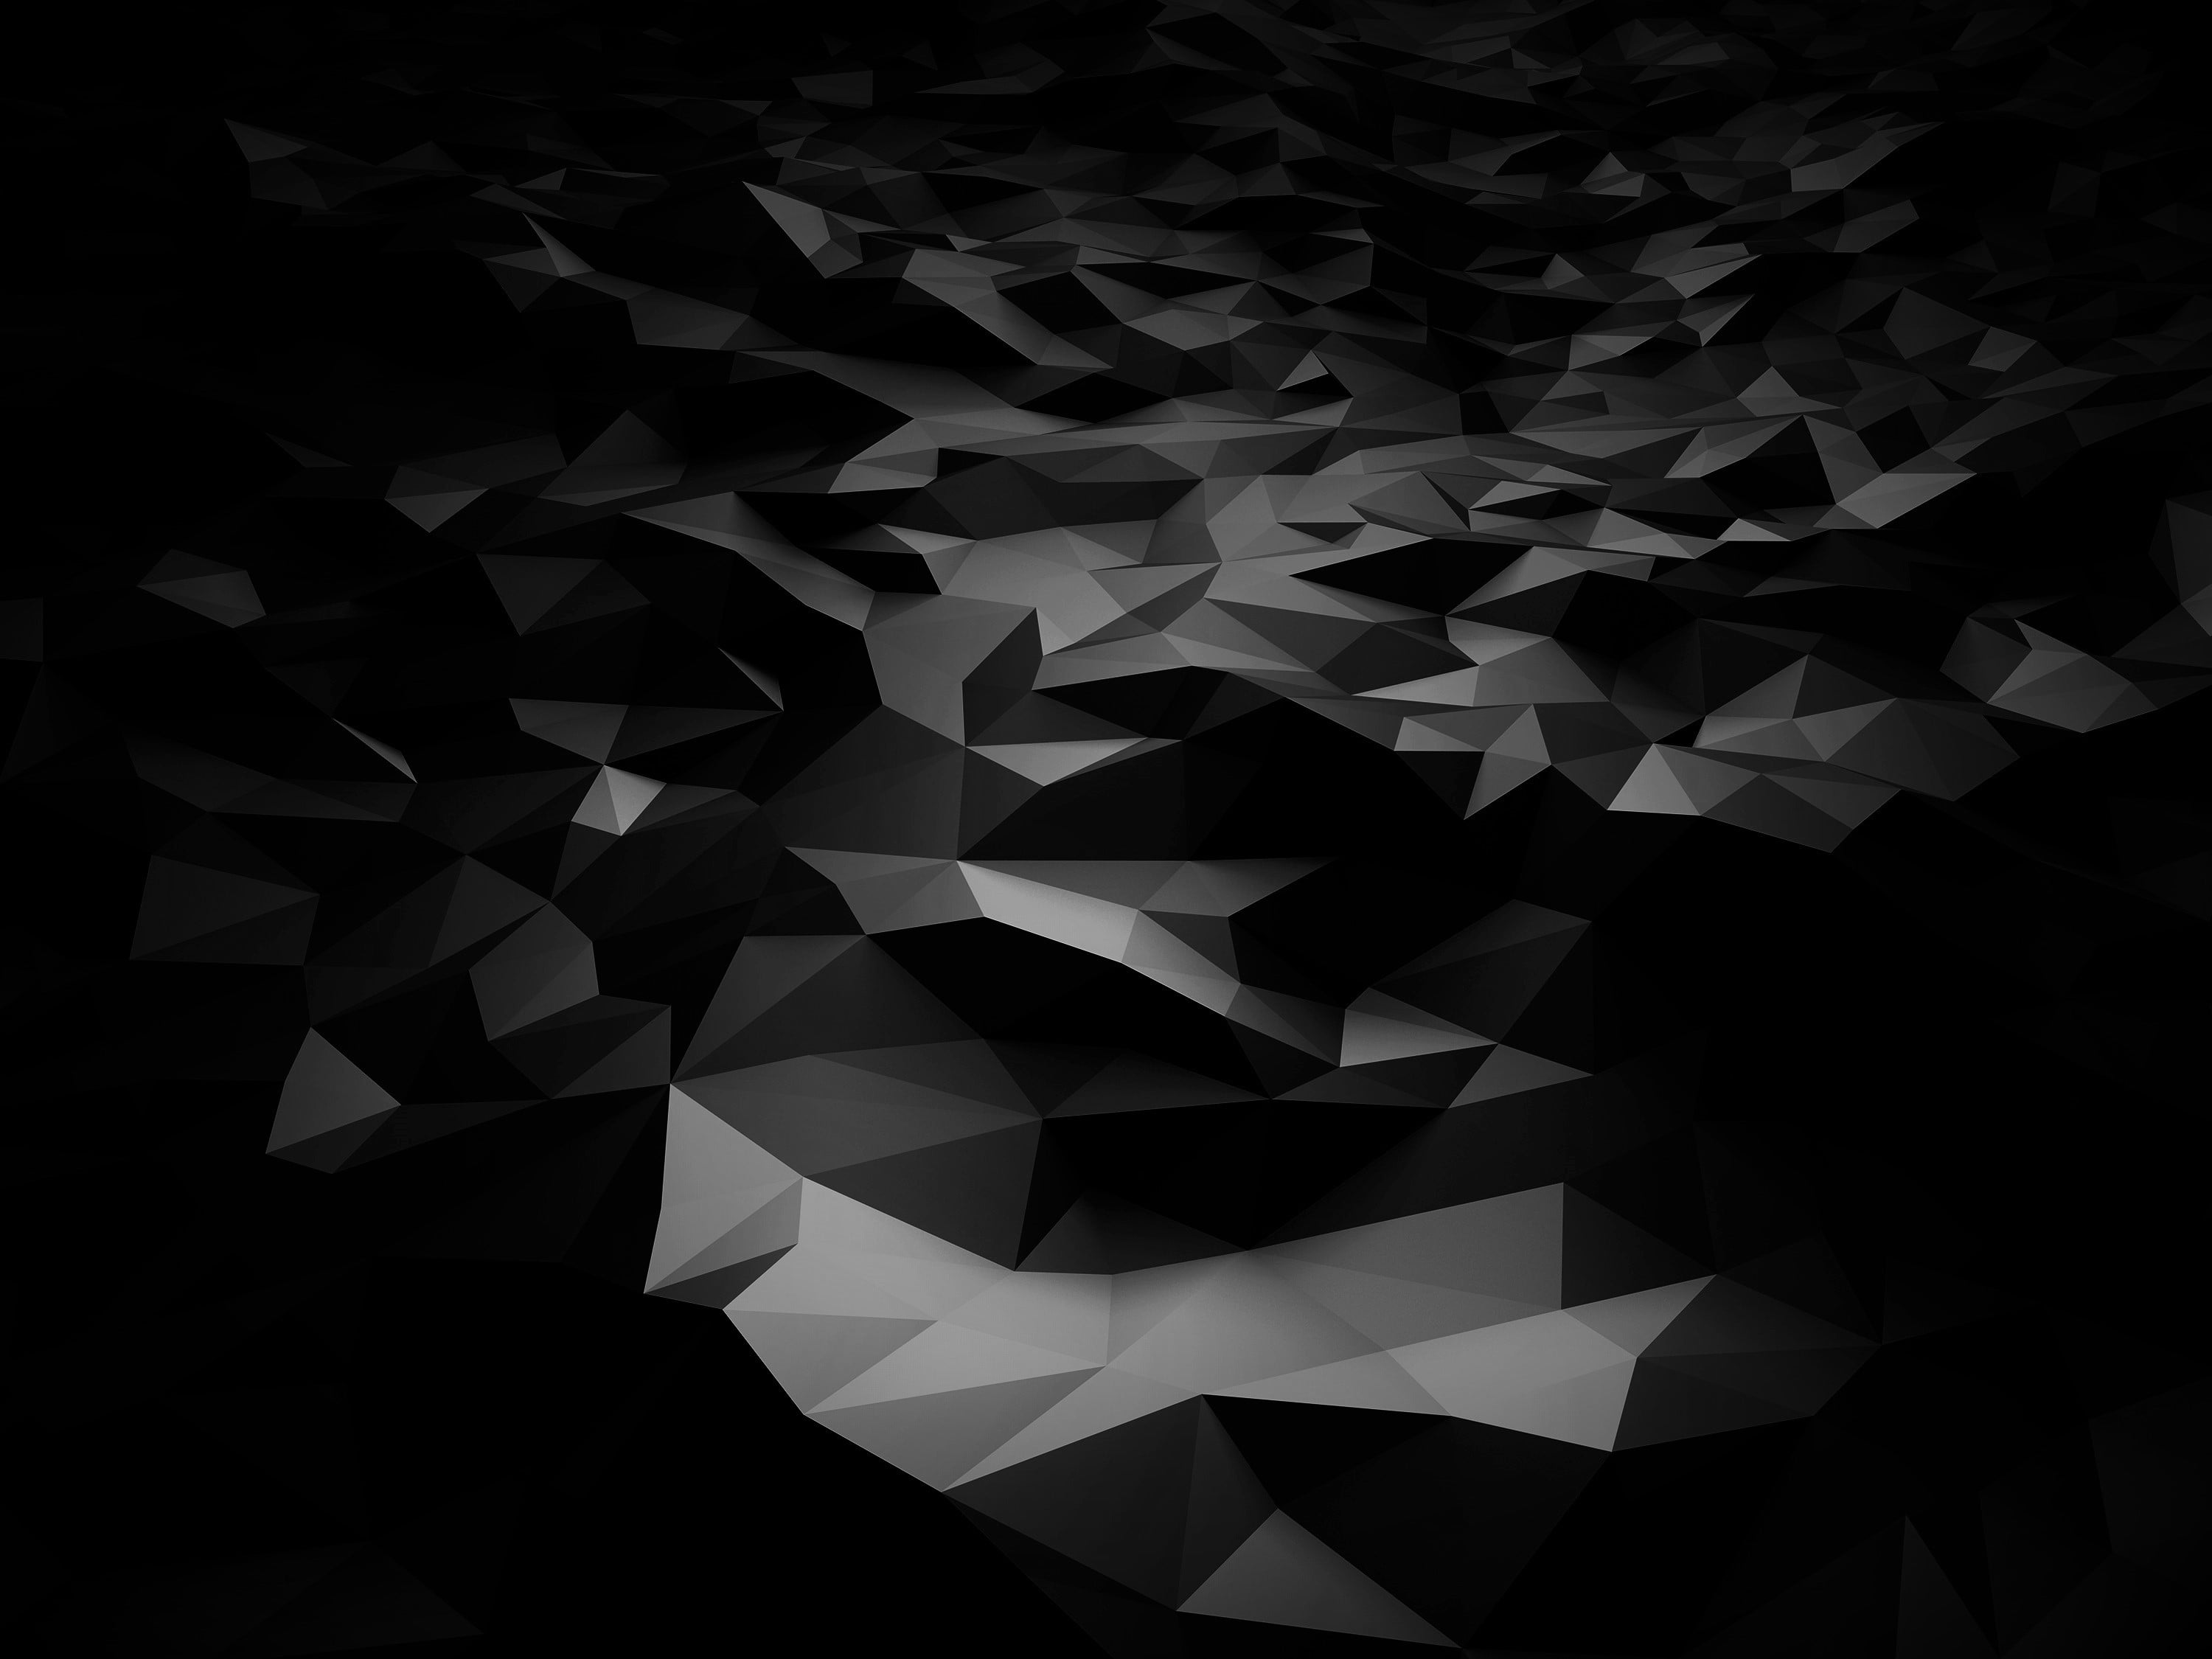 untitled, abstract, 3D, black, dark, polygon art, pattern, no people